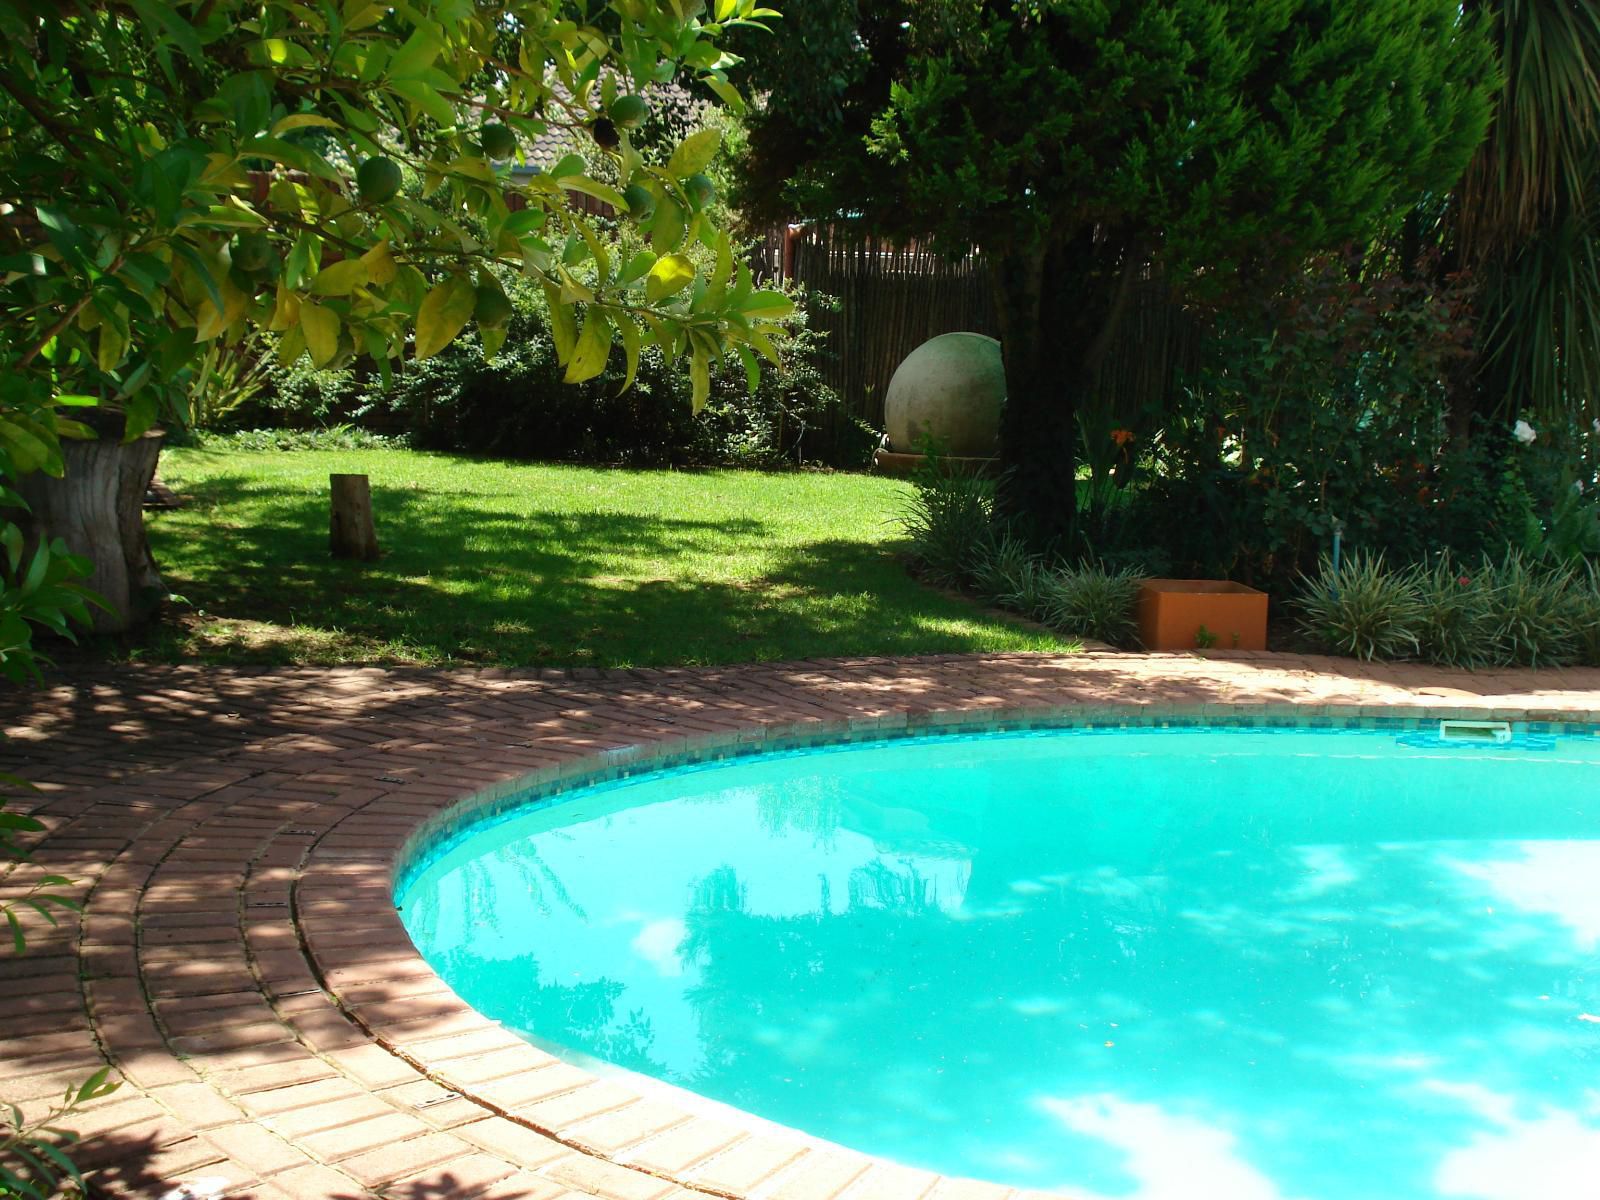 Anne S Place Potchefstroom North West Province South Africa Garden, Nature, Plant, Swimming Pool